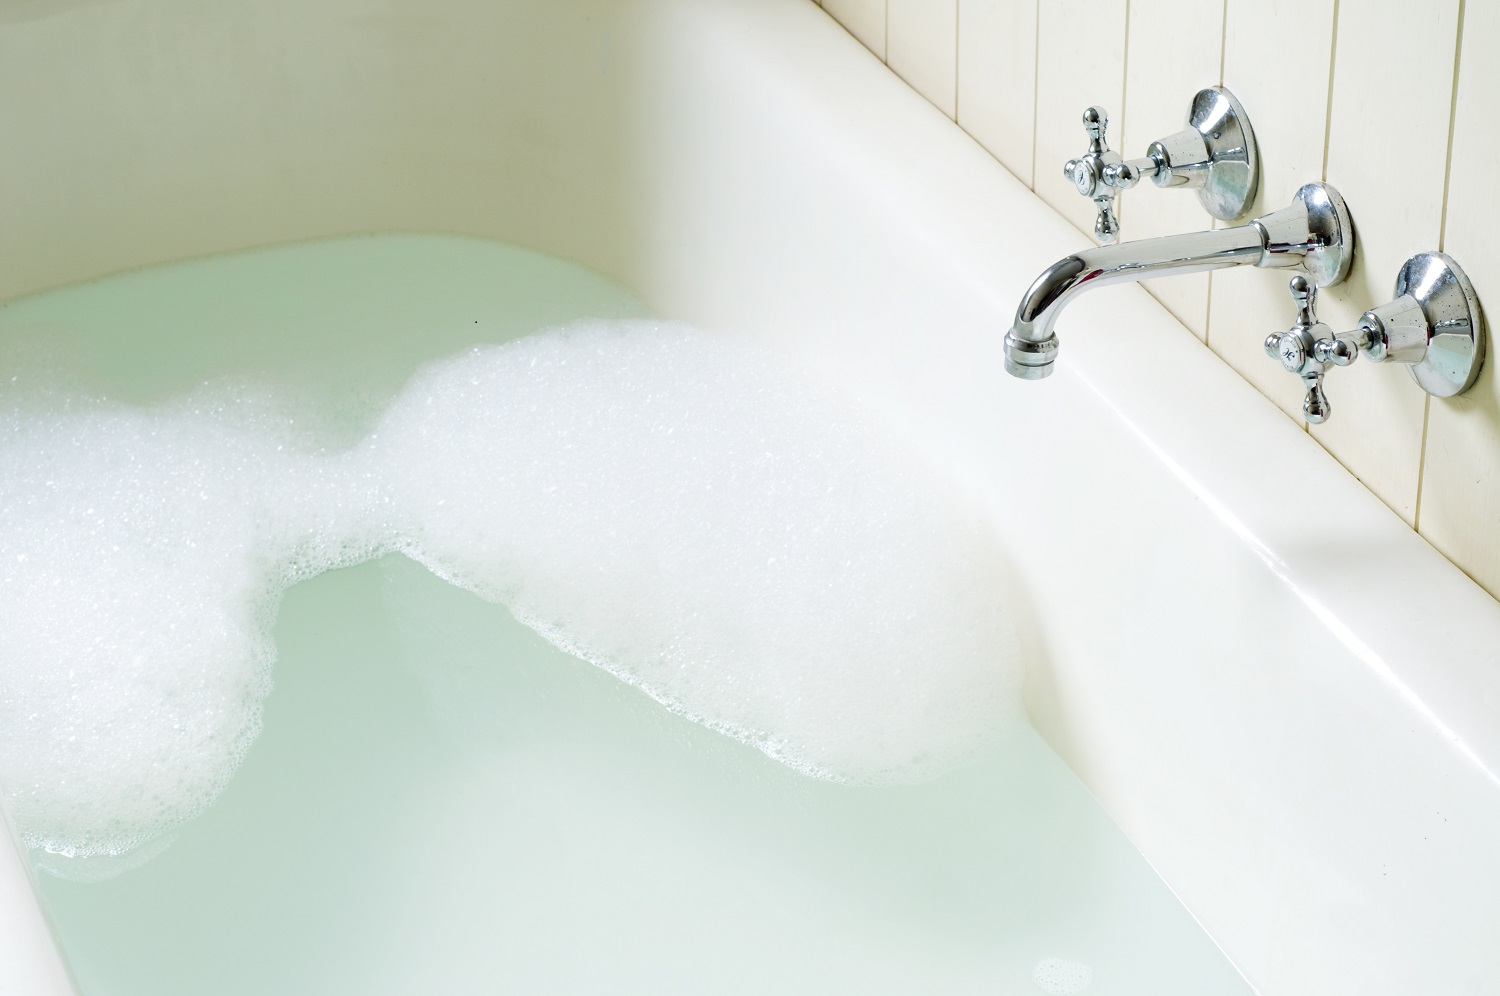 WHAT TO DO IF MY BATHTUB IS CLOGGED 